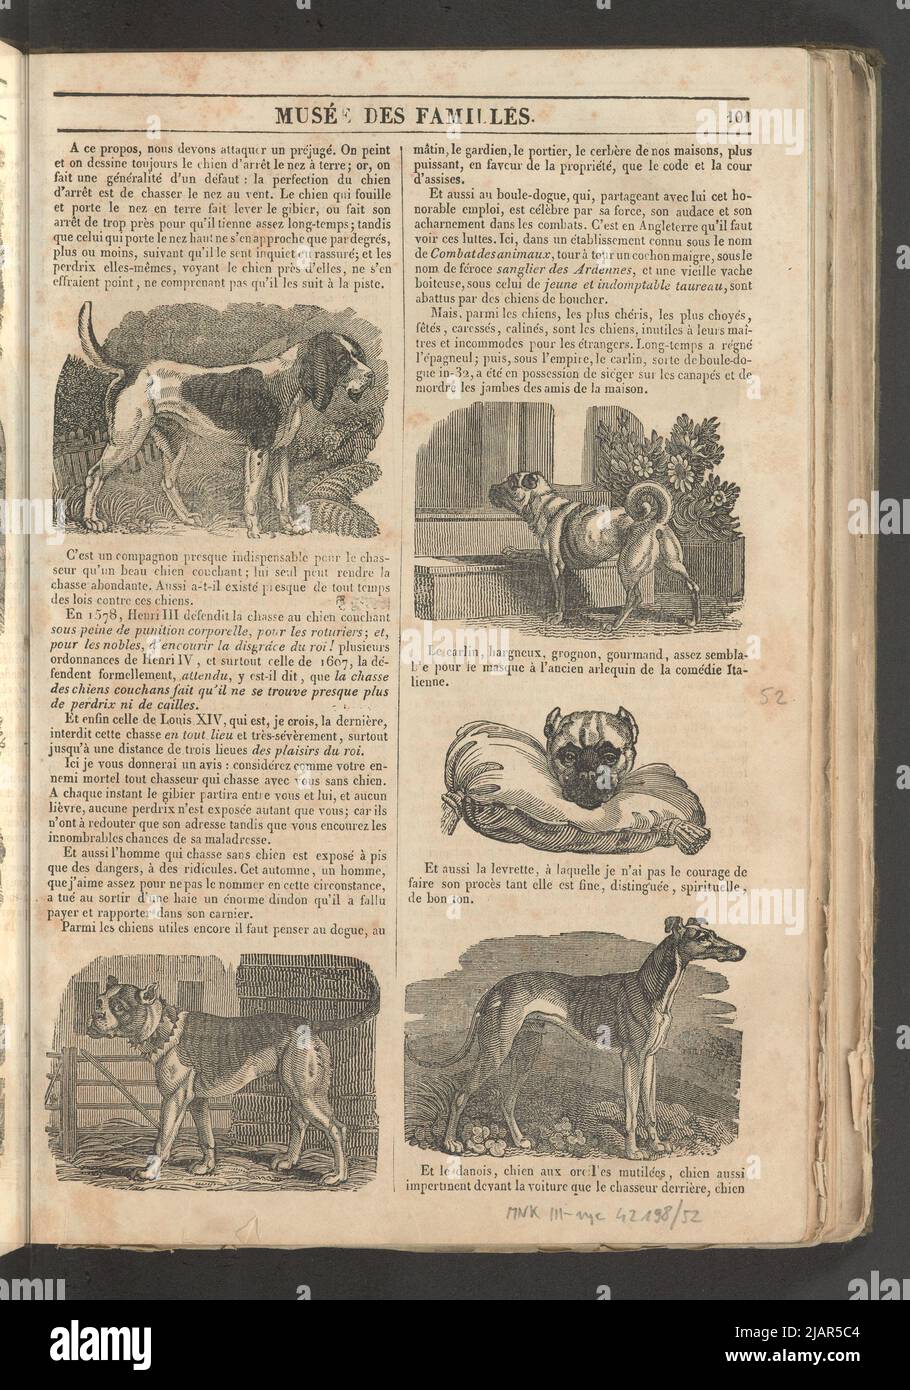 Notebook 13, December1833 6 Images of Dogs, 6 illustrations for the article Dogs by Alphonse Karr in: Musee des Familles, evening reading. T. 1. (Year 1 and 2) Paris, [1833 1834]. unknown Stock Photo